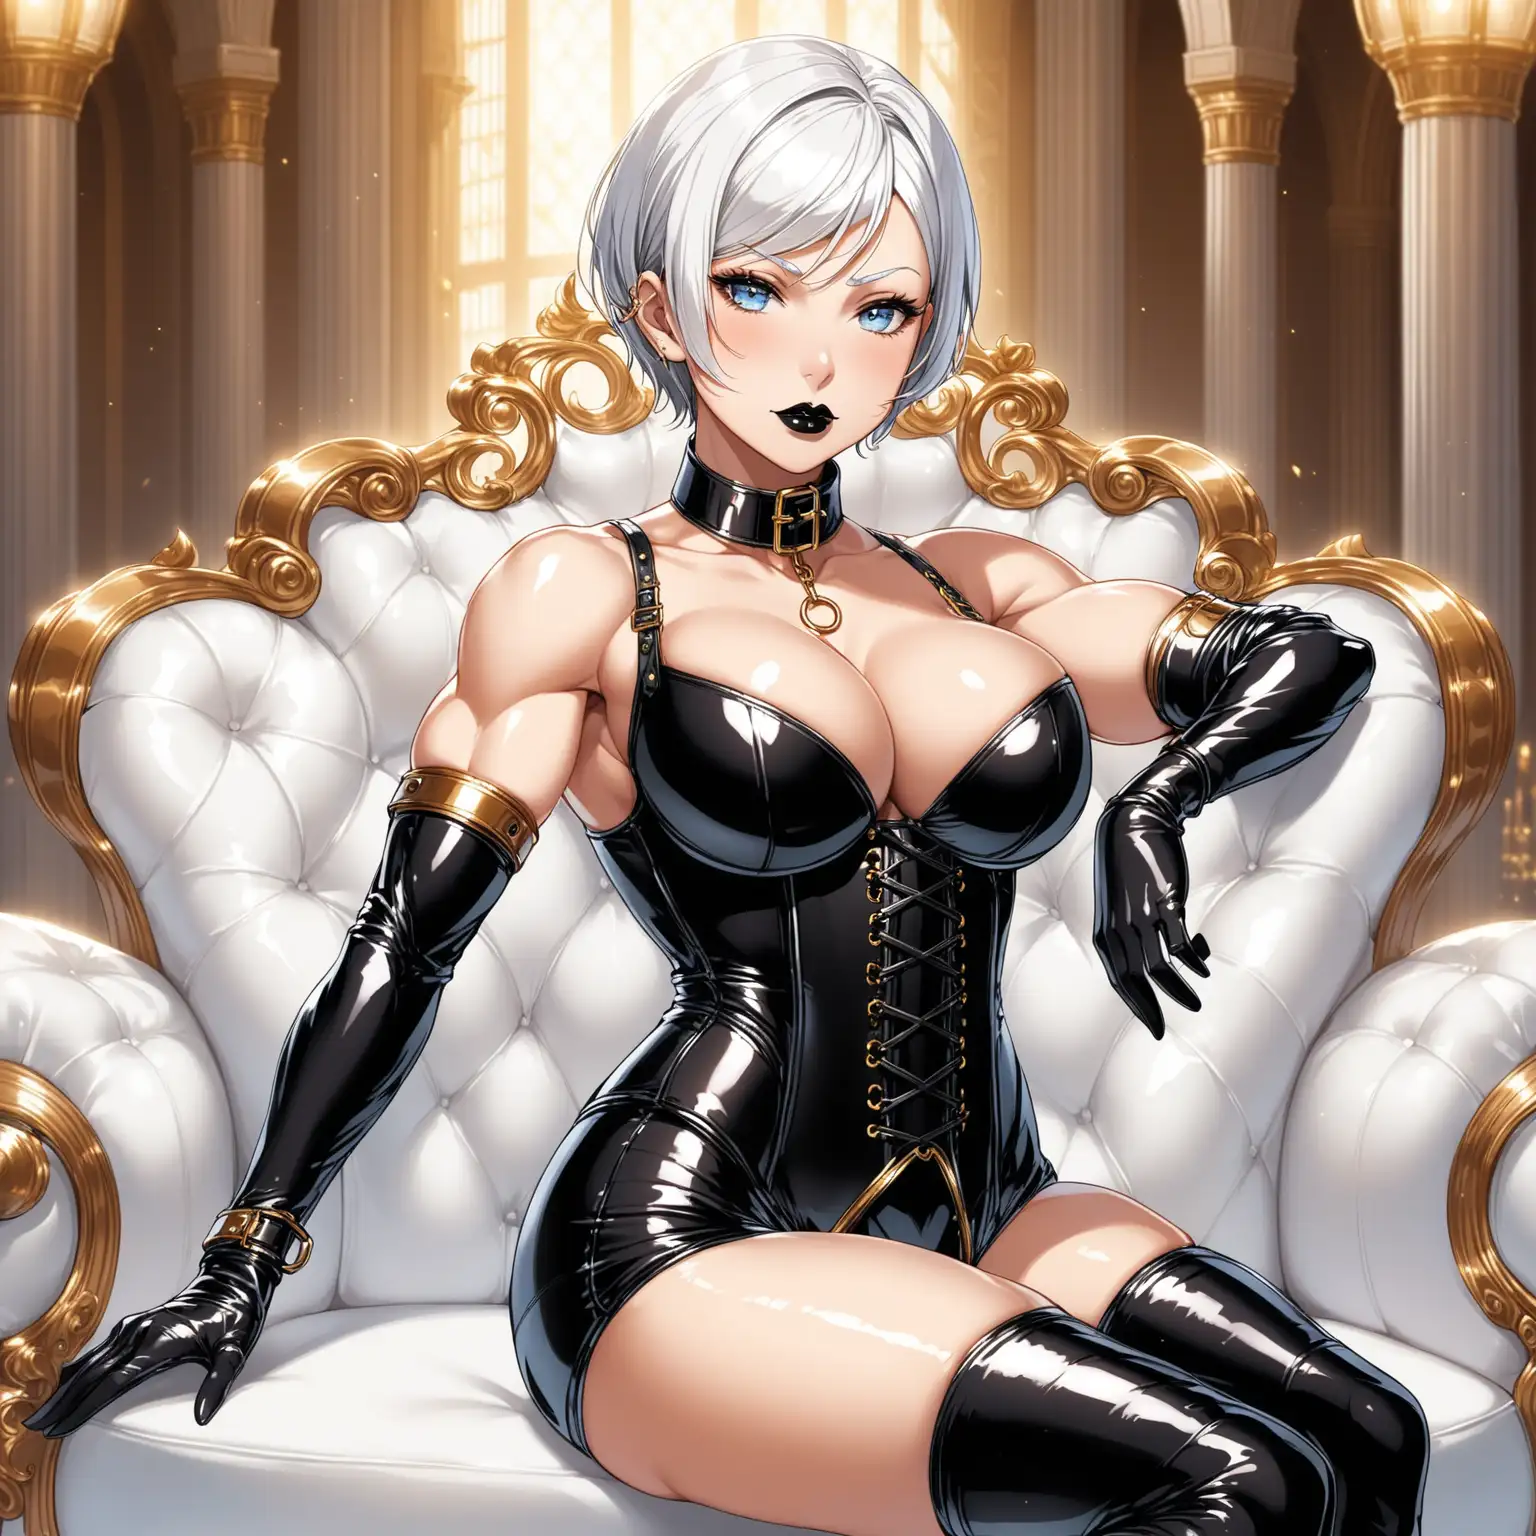 1 woman. She has fair skin,huge tits, white hair in a pixie cut, light blue eyes, she is muscular and very beautiful and 60 years old. She has makeup on with shiny black lipstick. She is wearing a shiny black latex corset, miniskirt, very long gloves, thigh high boots, bdsm restraints and a thick bondage posture collar with a ring. She has a calm expression. She is in a royal palace with white leather furniture with gold accents.